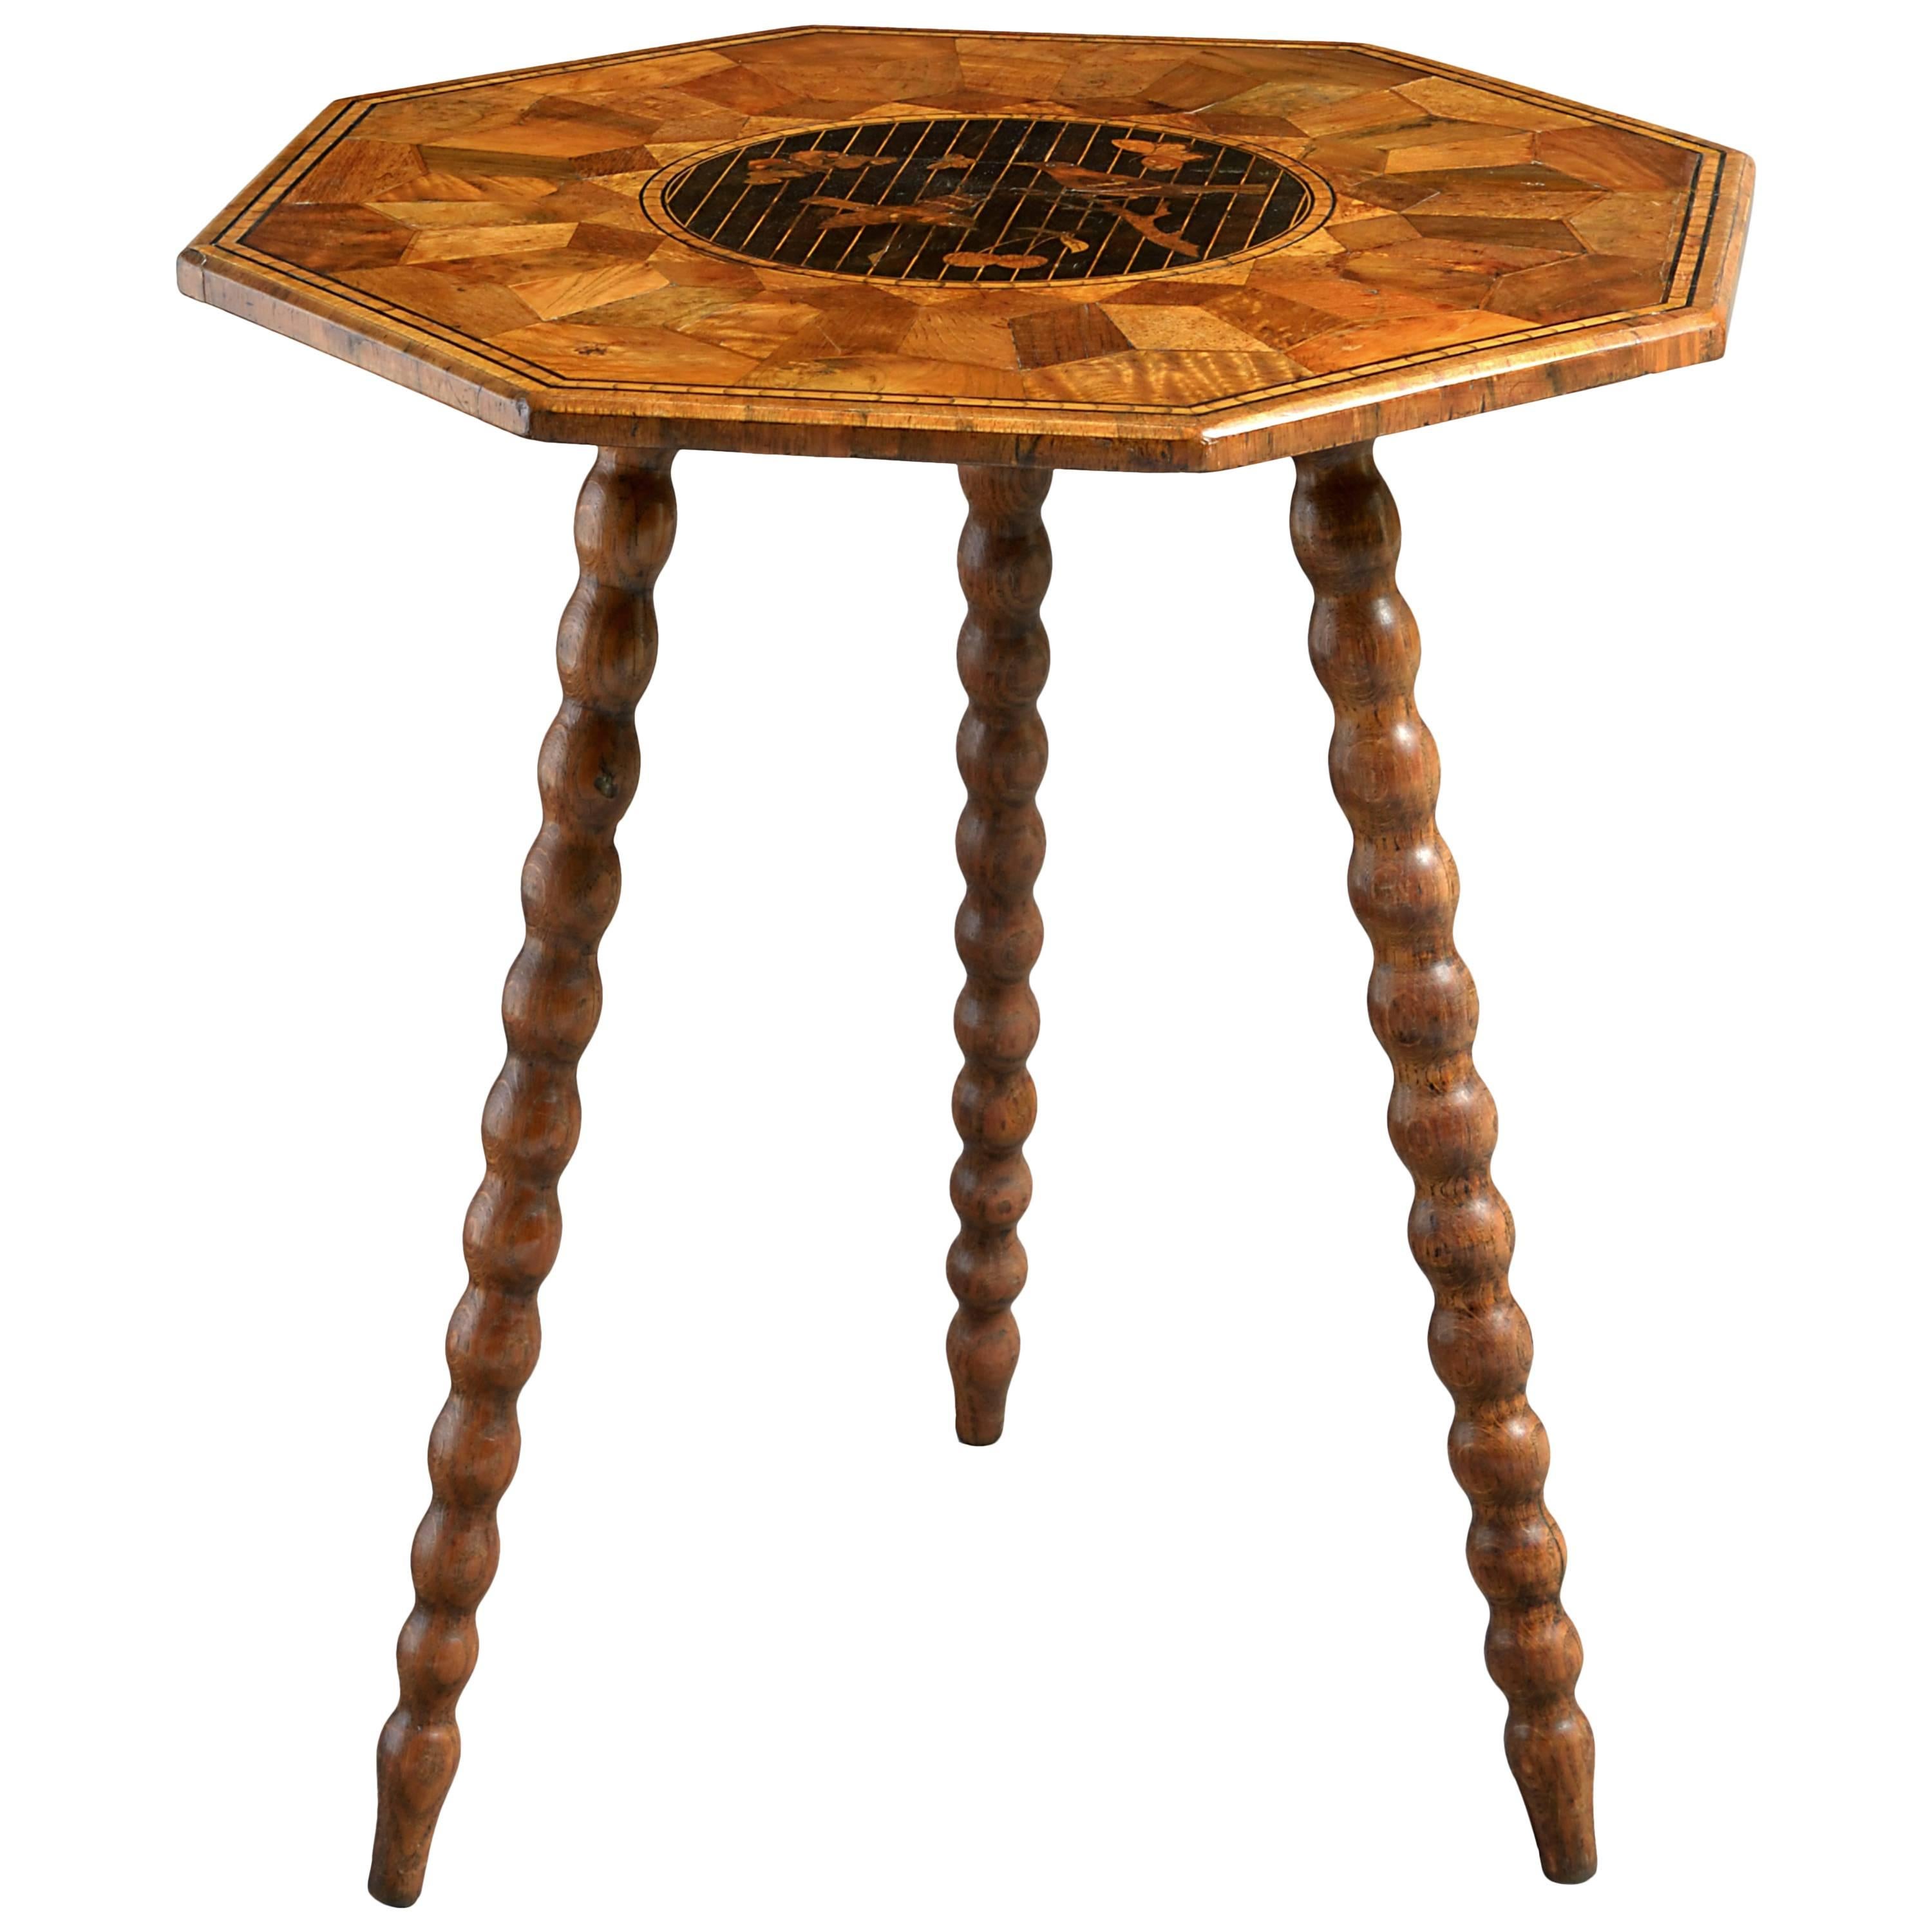 Marquetry Gypsy Table